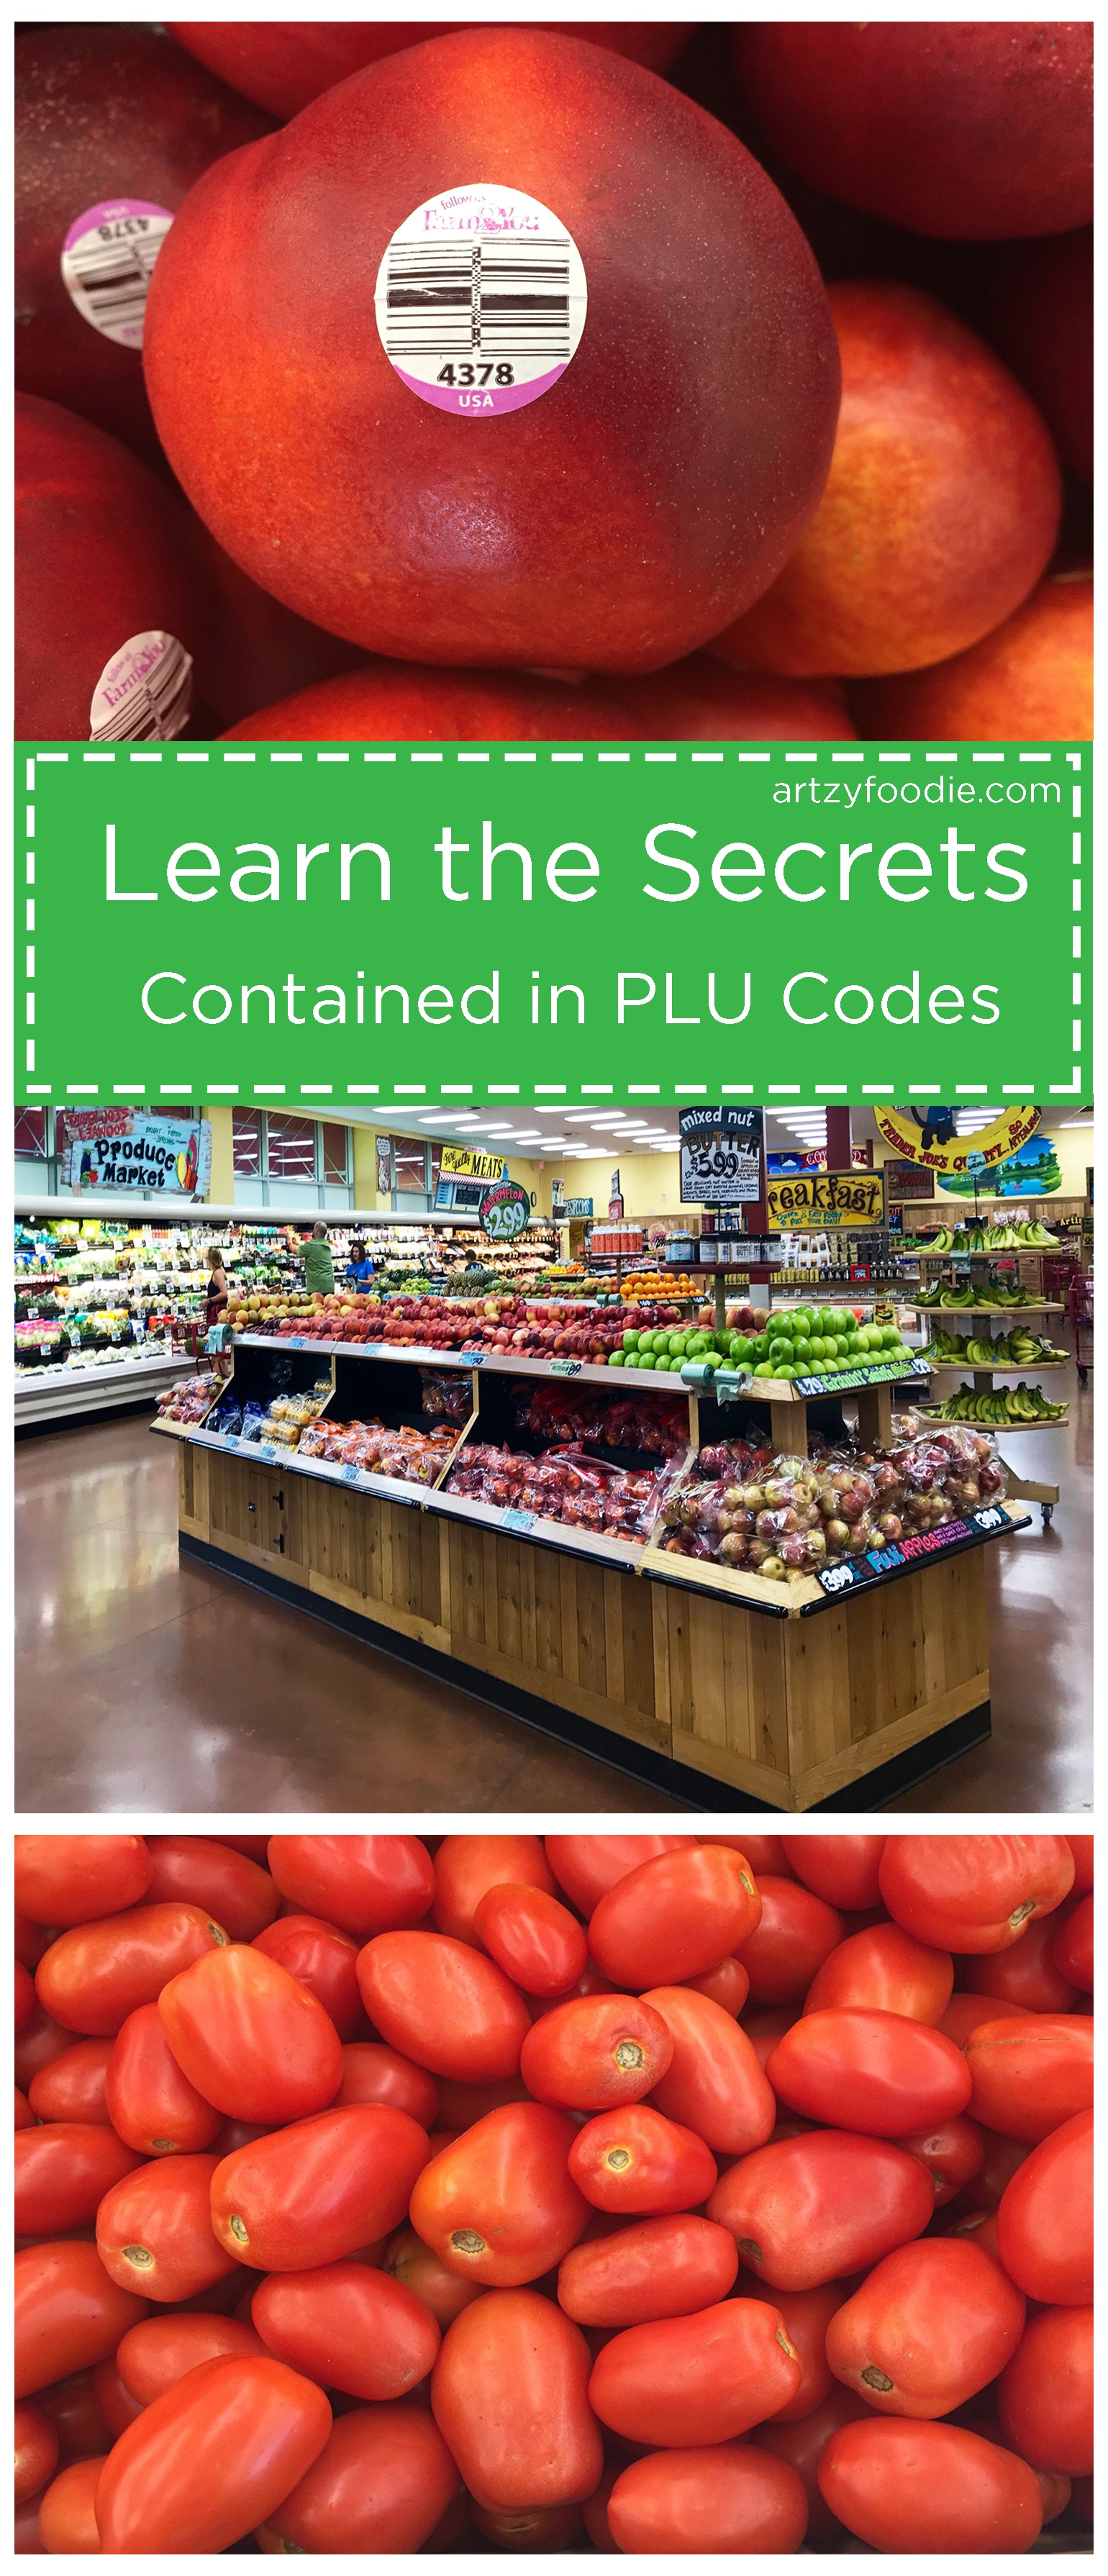 Learn the secret information you need to know in PLU codes